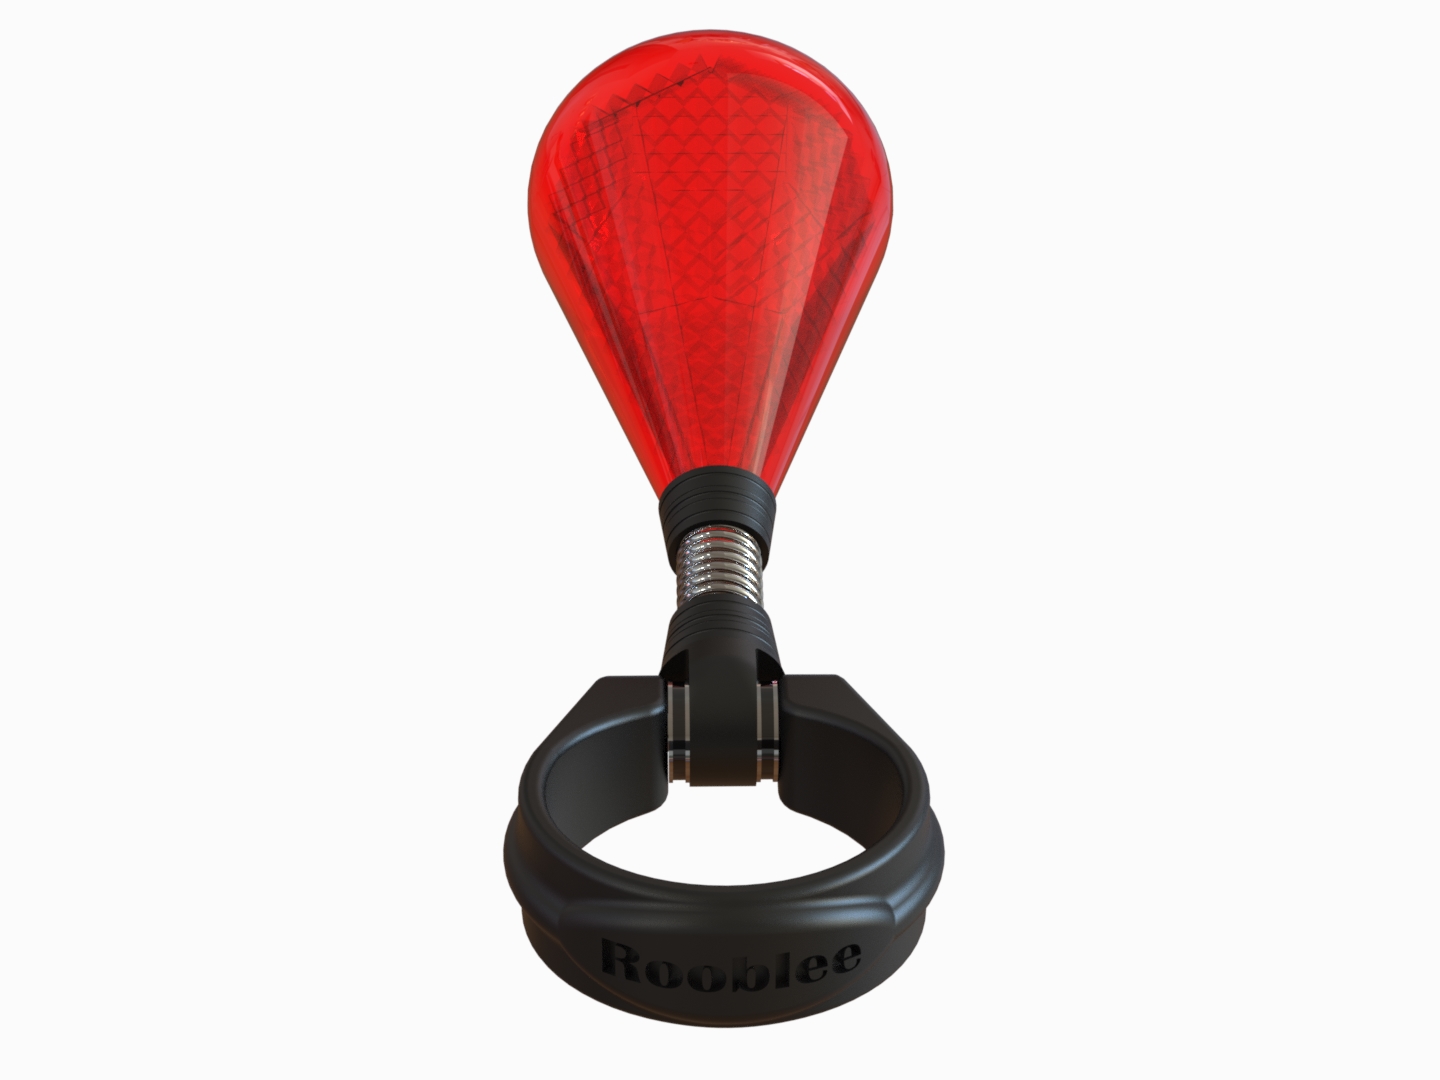 MUSE Design Winners - Rooblee Bicycle Safety Reflector